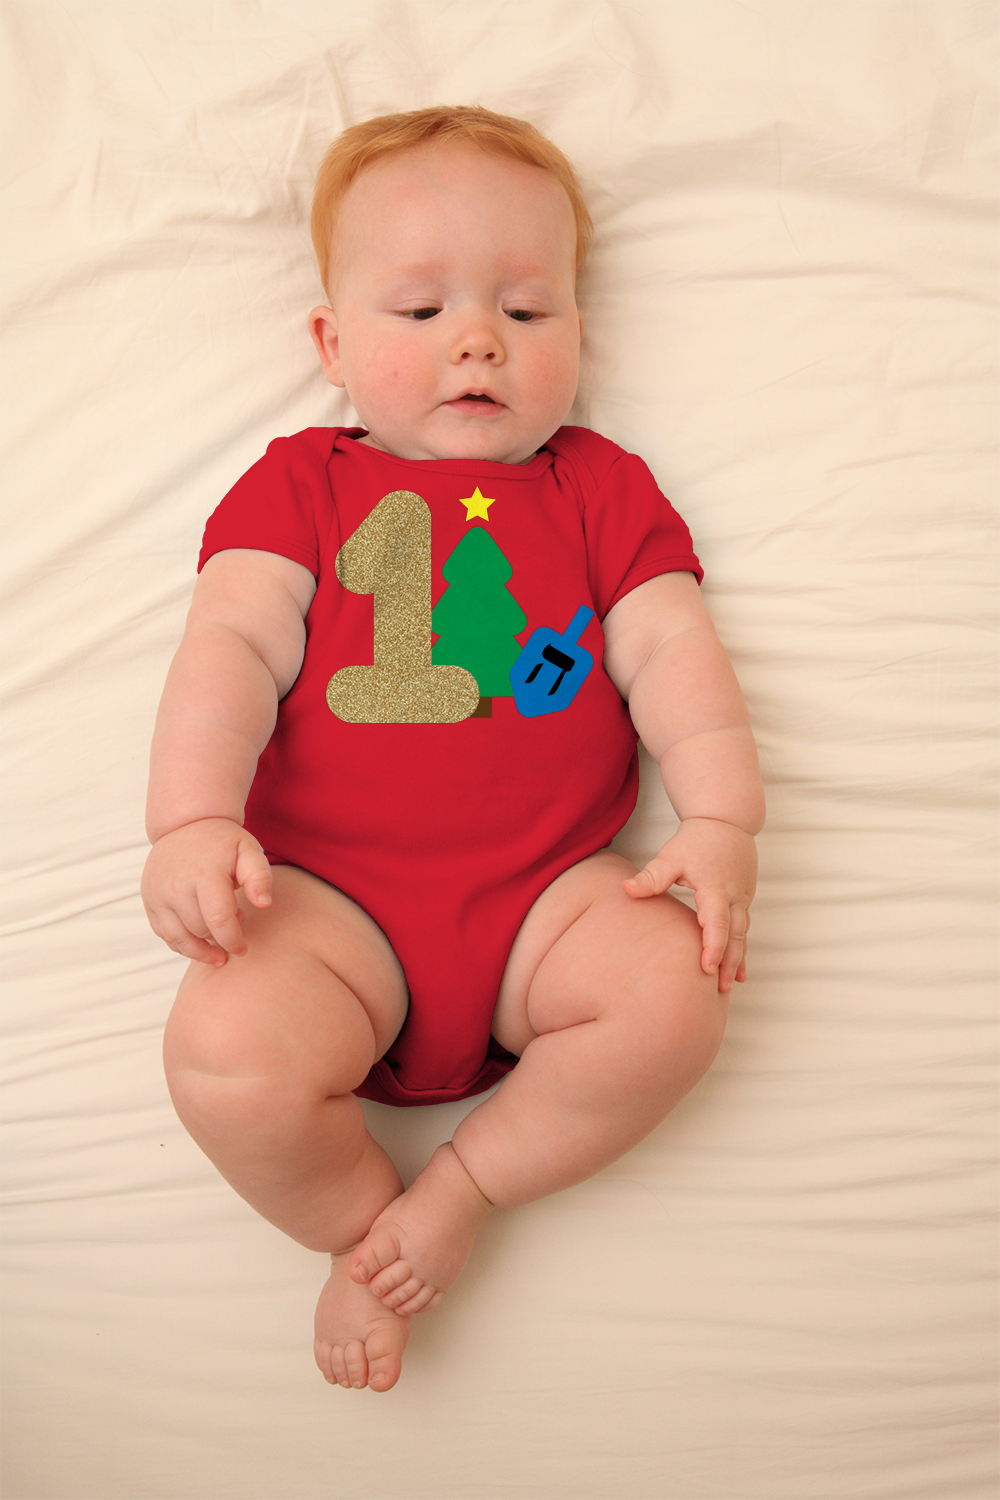 A white baby with a red onesie lays on a cream blanket. Their shirt has a large gold 1 with a Christmas tree and dreidel behind it.